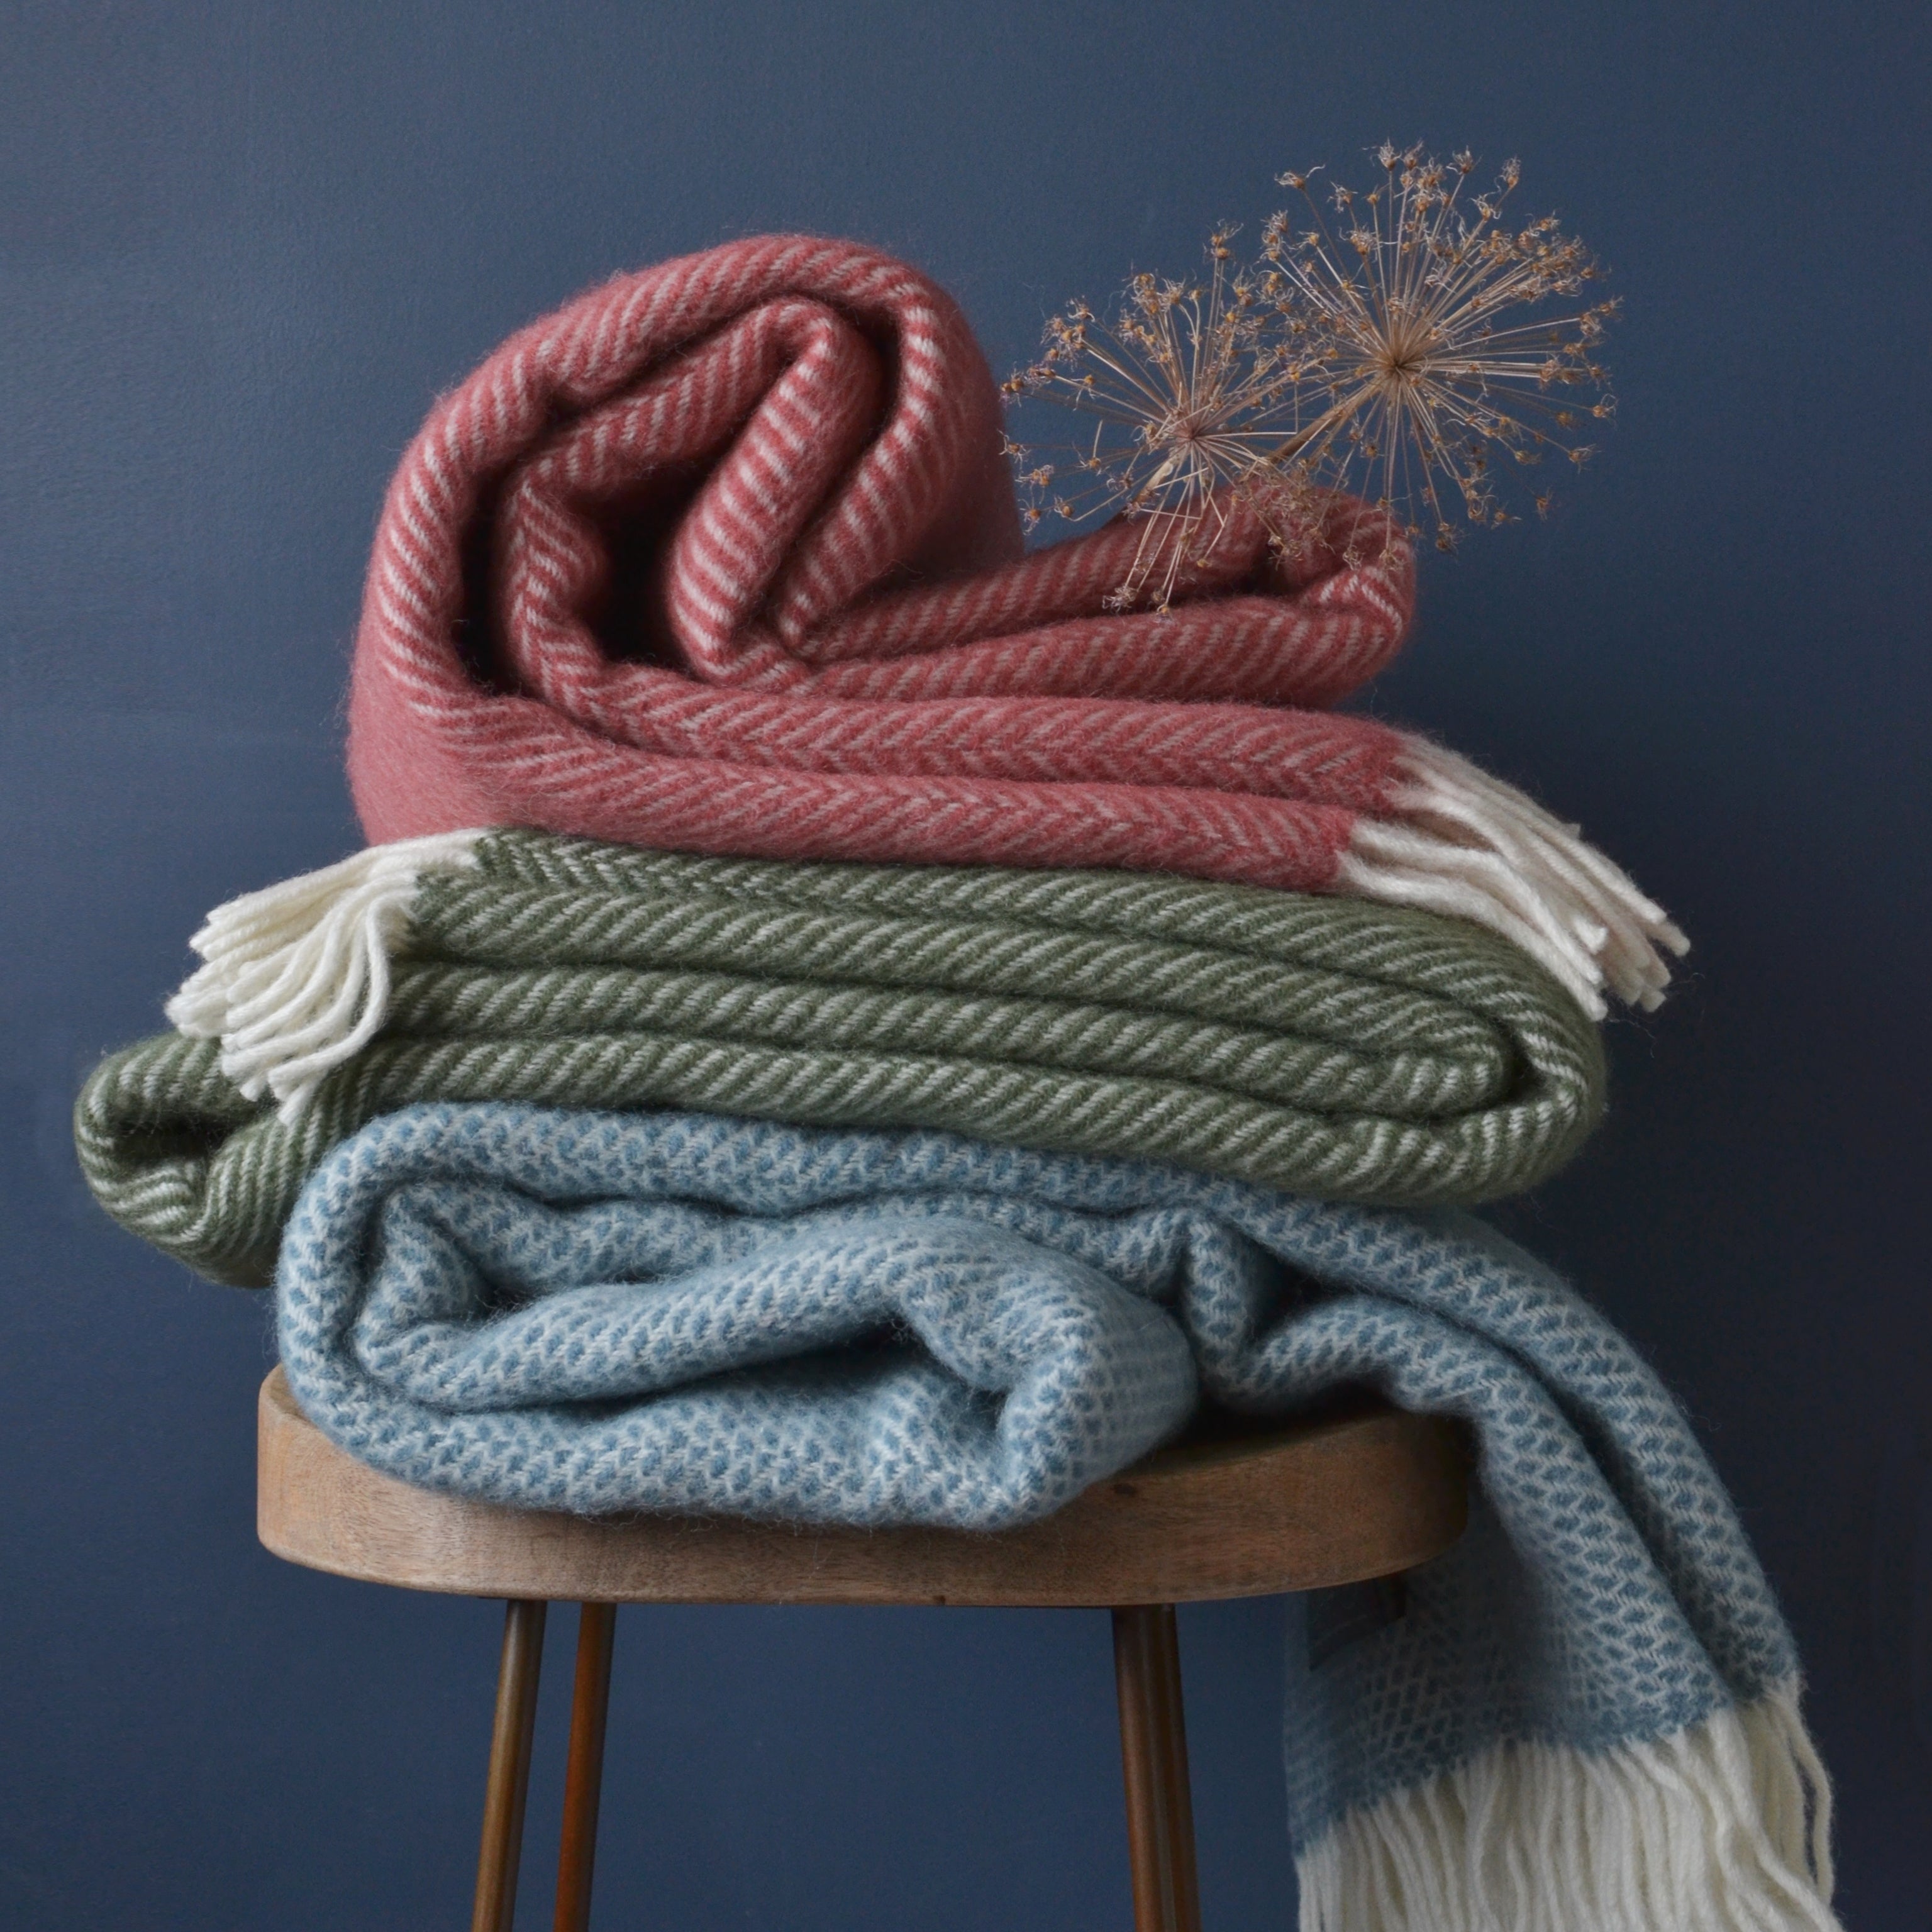 Why do we like being cosy? – The British Blanket Company